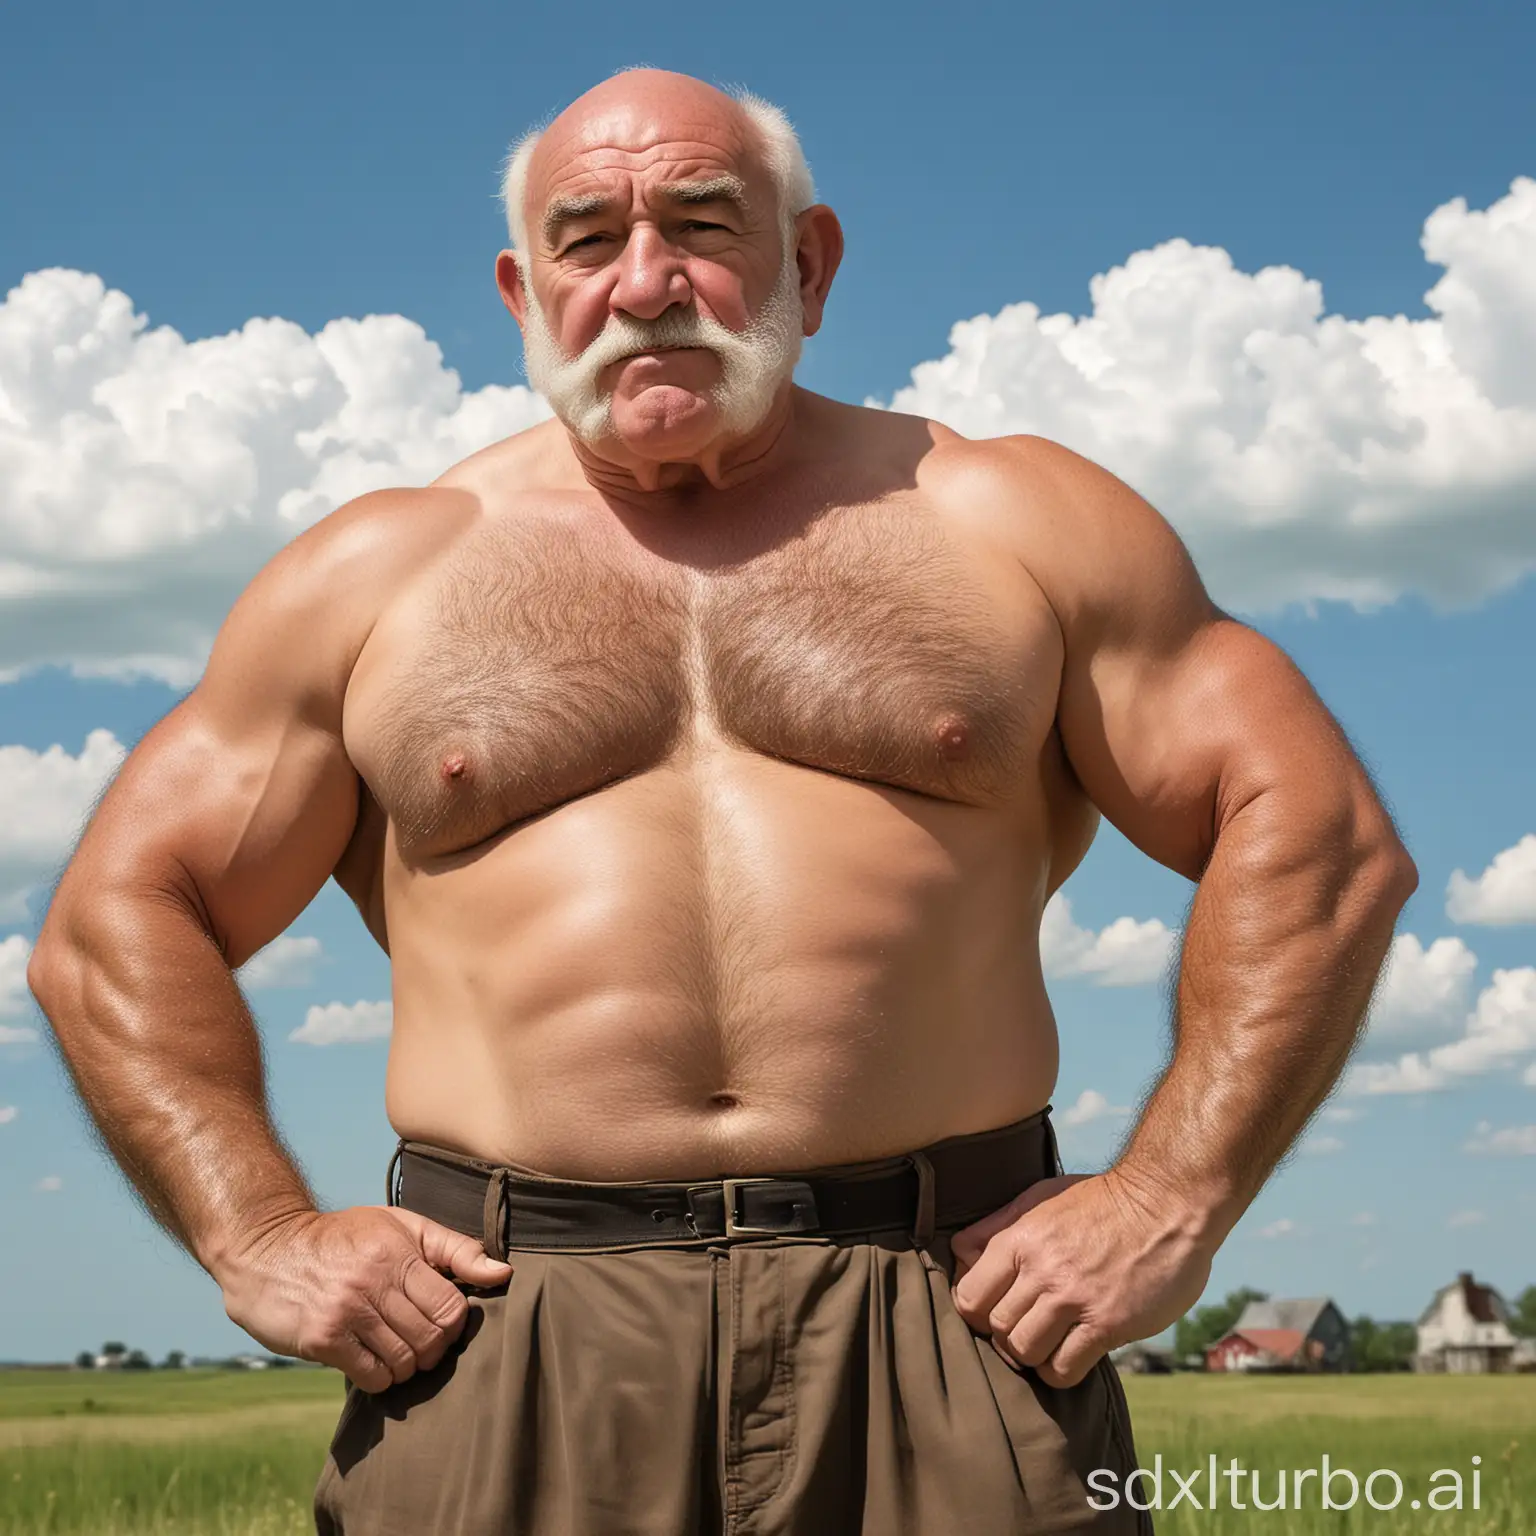 Ed Asner plays a strongman farmer!! sideways angle of extremely muscular shirtless and hairy Ed Asner. He takes many steroids and becomes 9 times bigger than Zangief!!  in color, beside him, HQ color photo. Hirsute physique. the background is a farm on a summer day, blue skies and big puffy clouds.